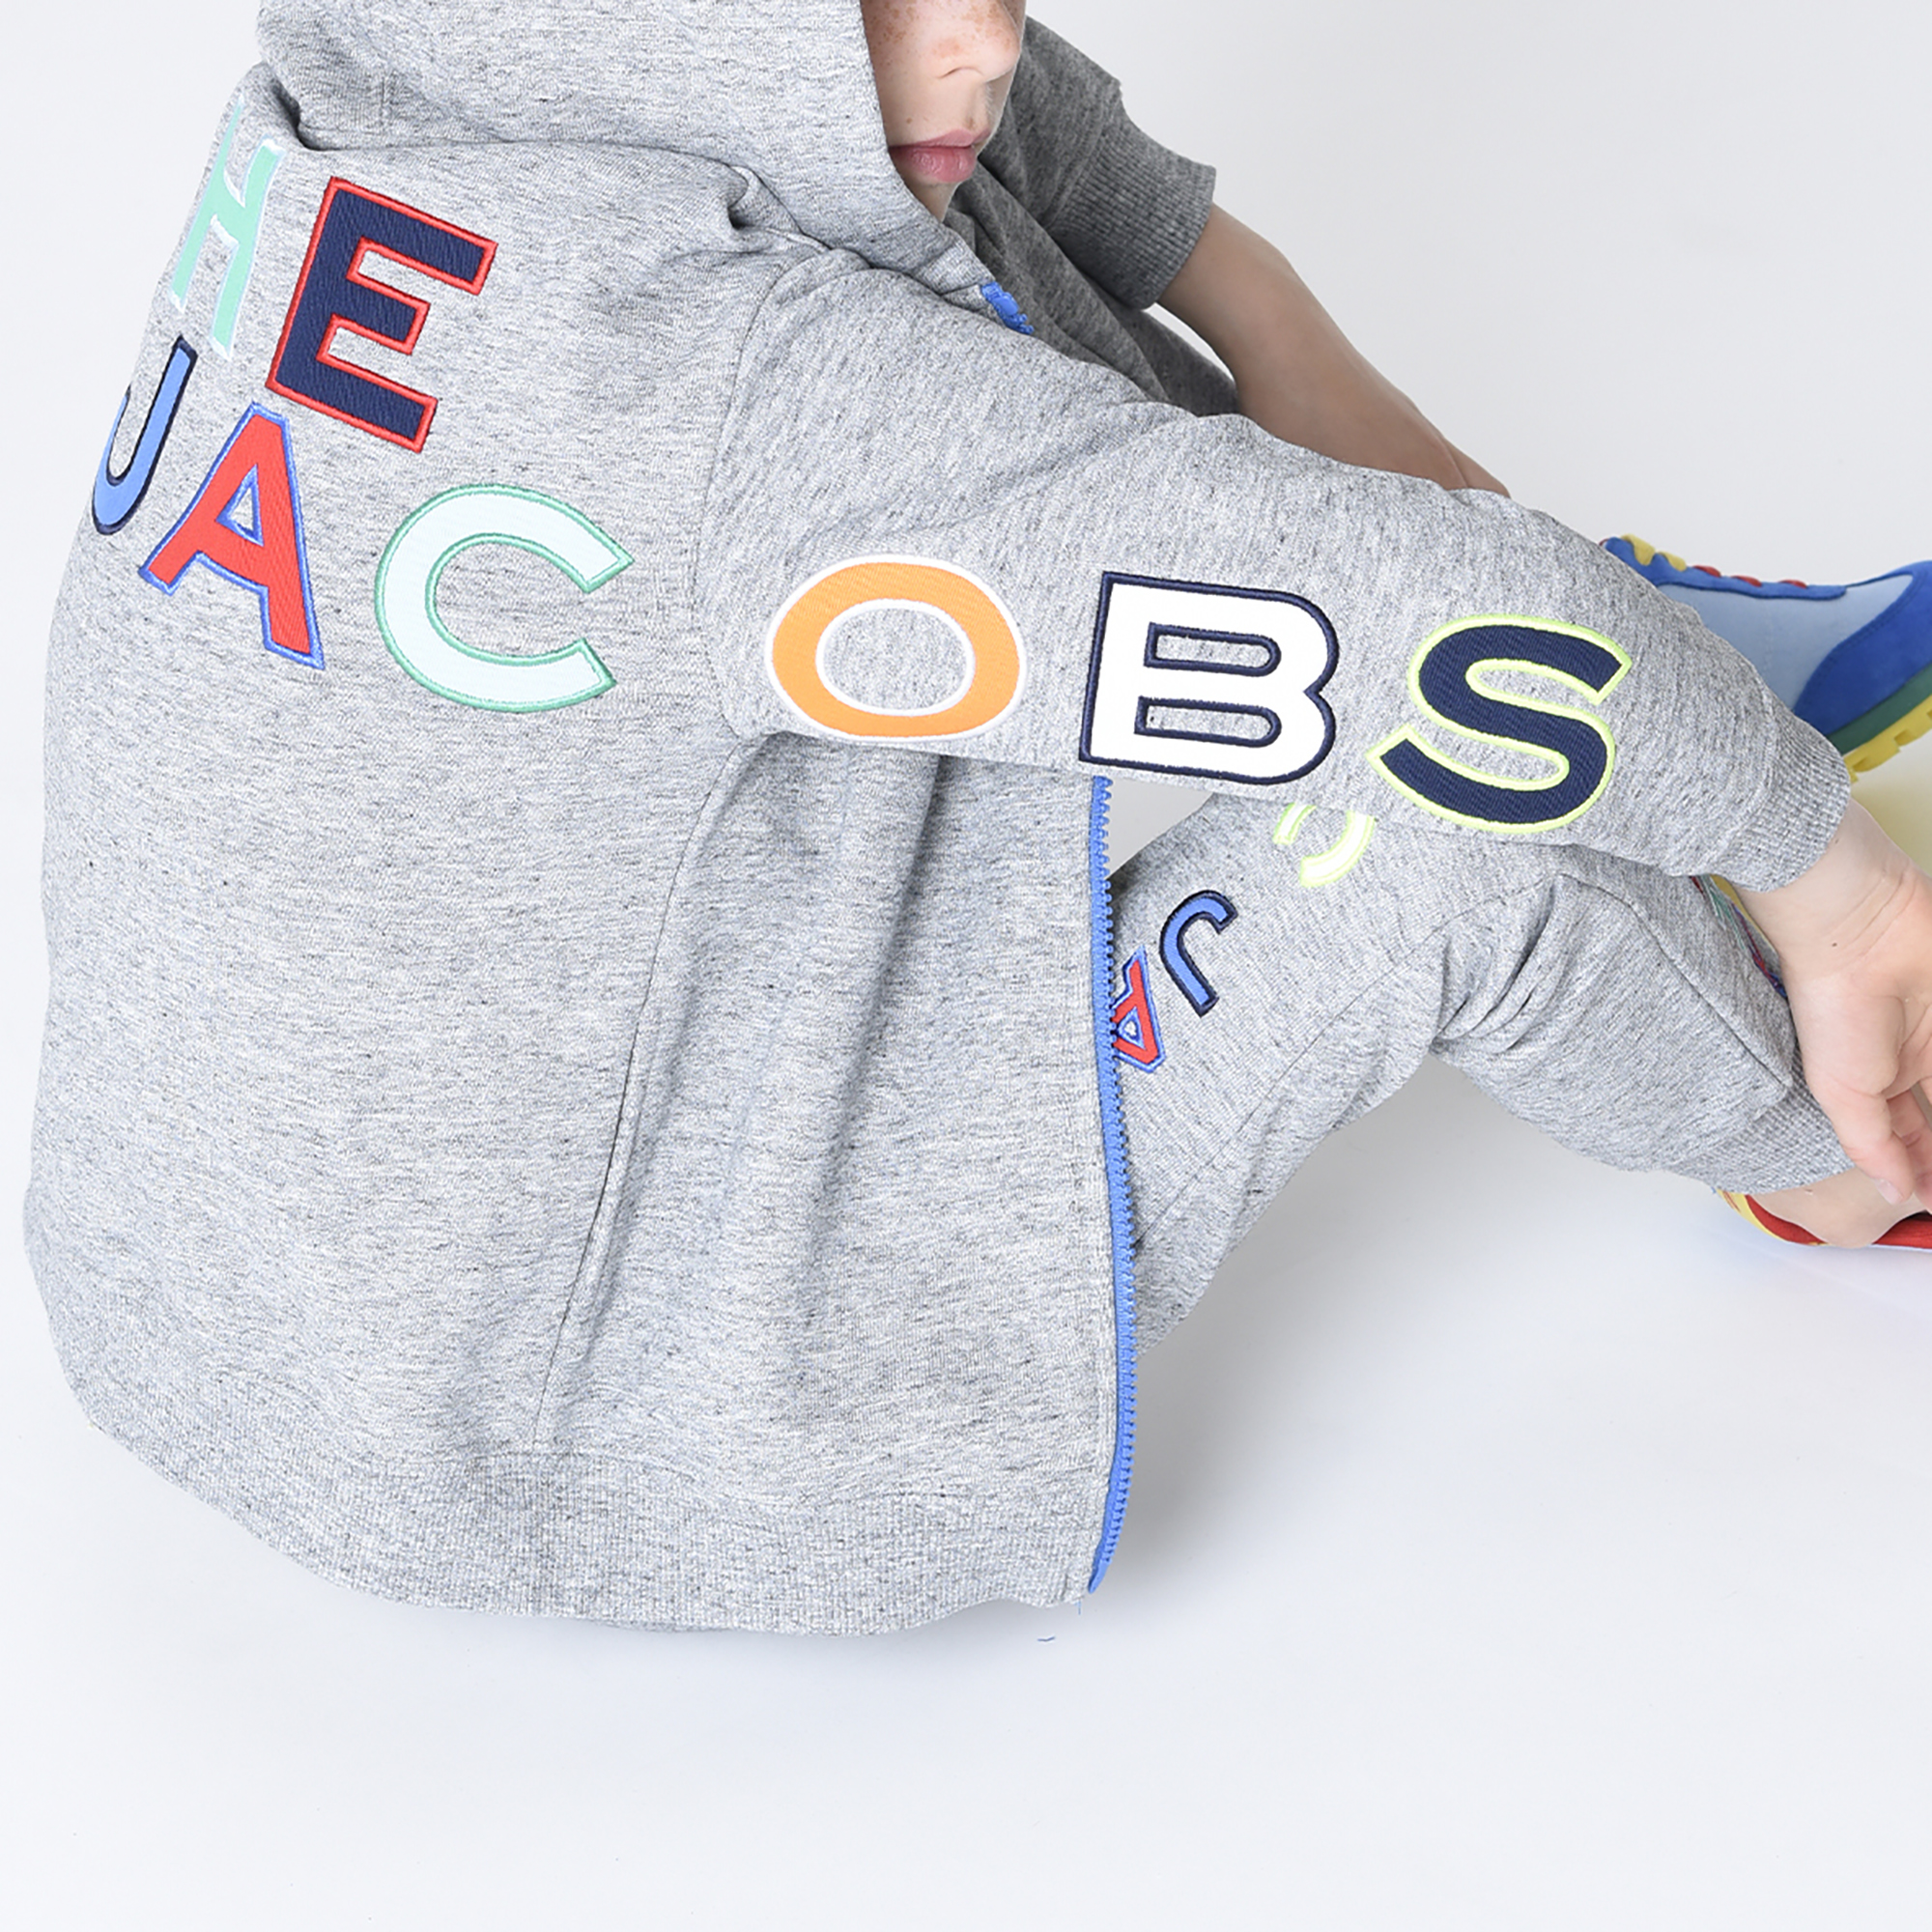 Hooded jogging cardigan MARC JACOBS for BOY